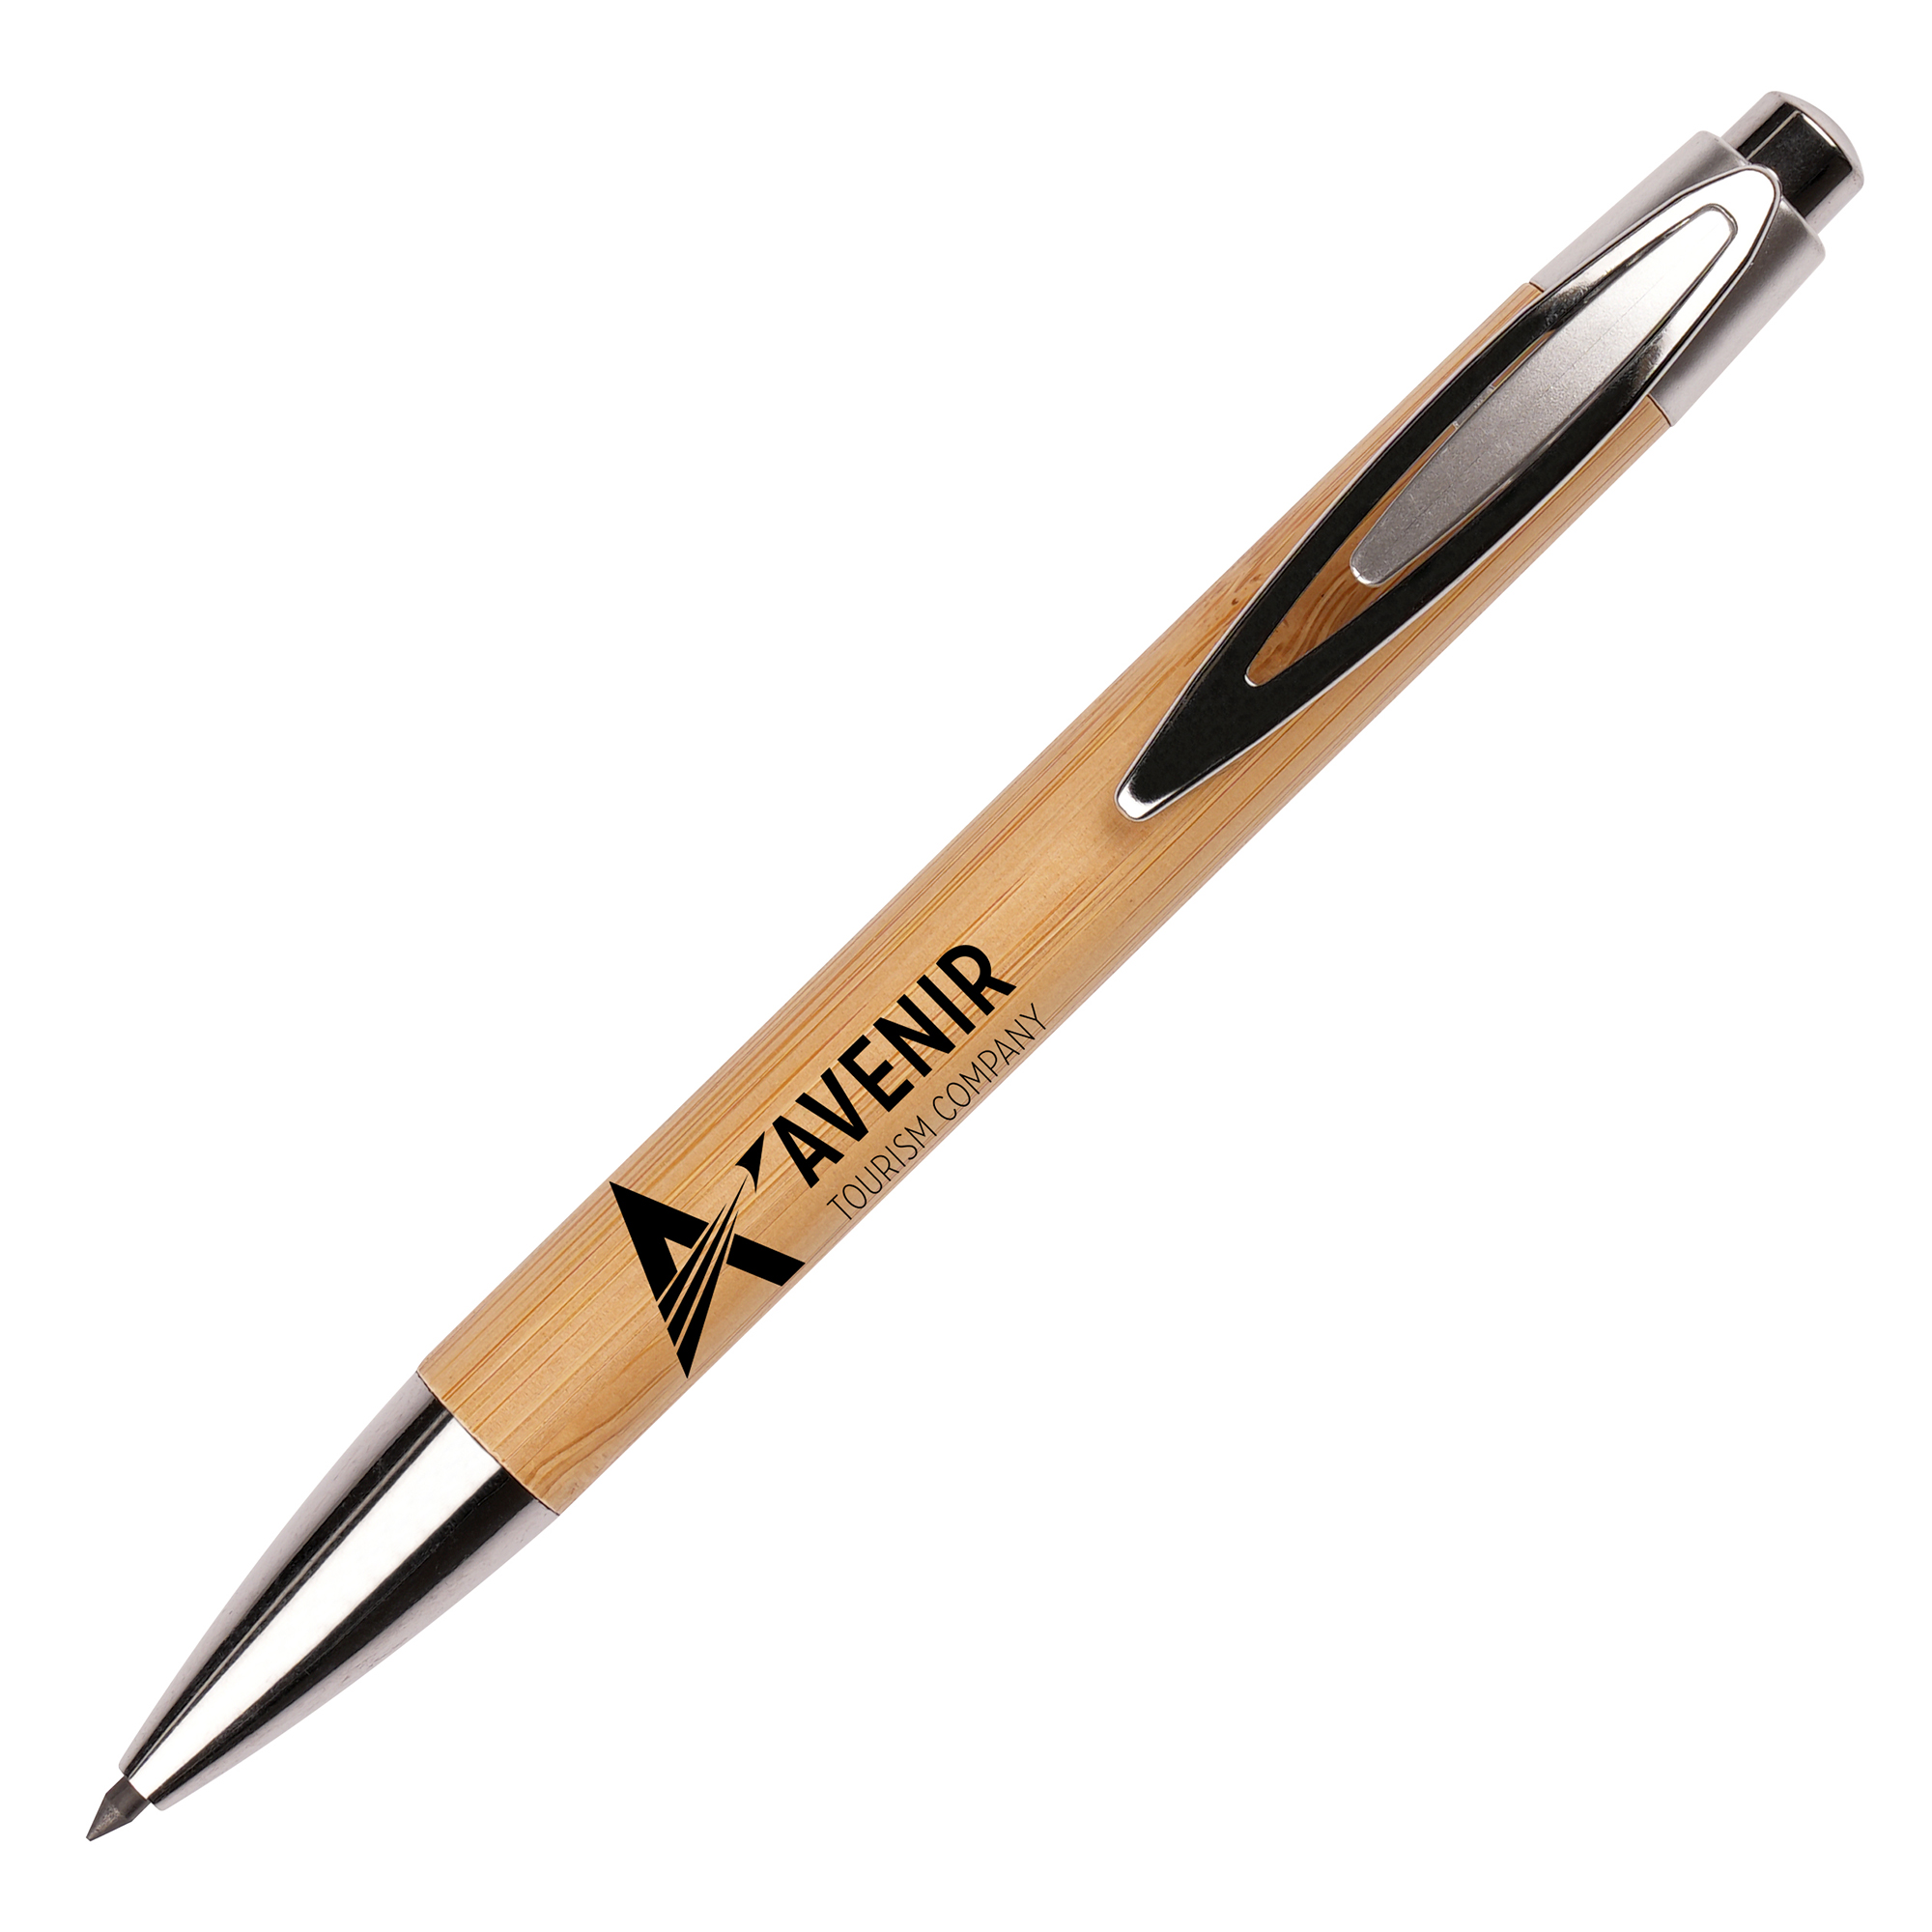 An eco-friendly bamboo eternity pencil with bamboo barrel, metal clip and attractive chrome trim. The pencil is made from 99% graphite and has microscopic reduction for eternal use without wearing down.